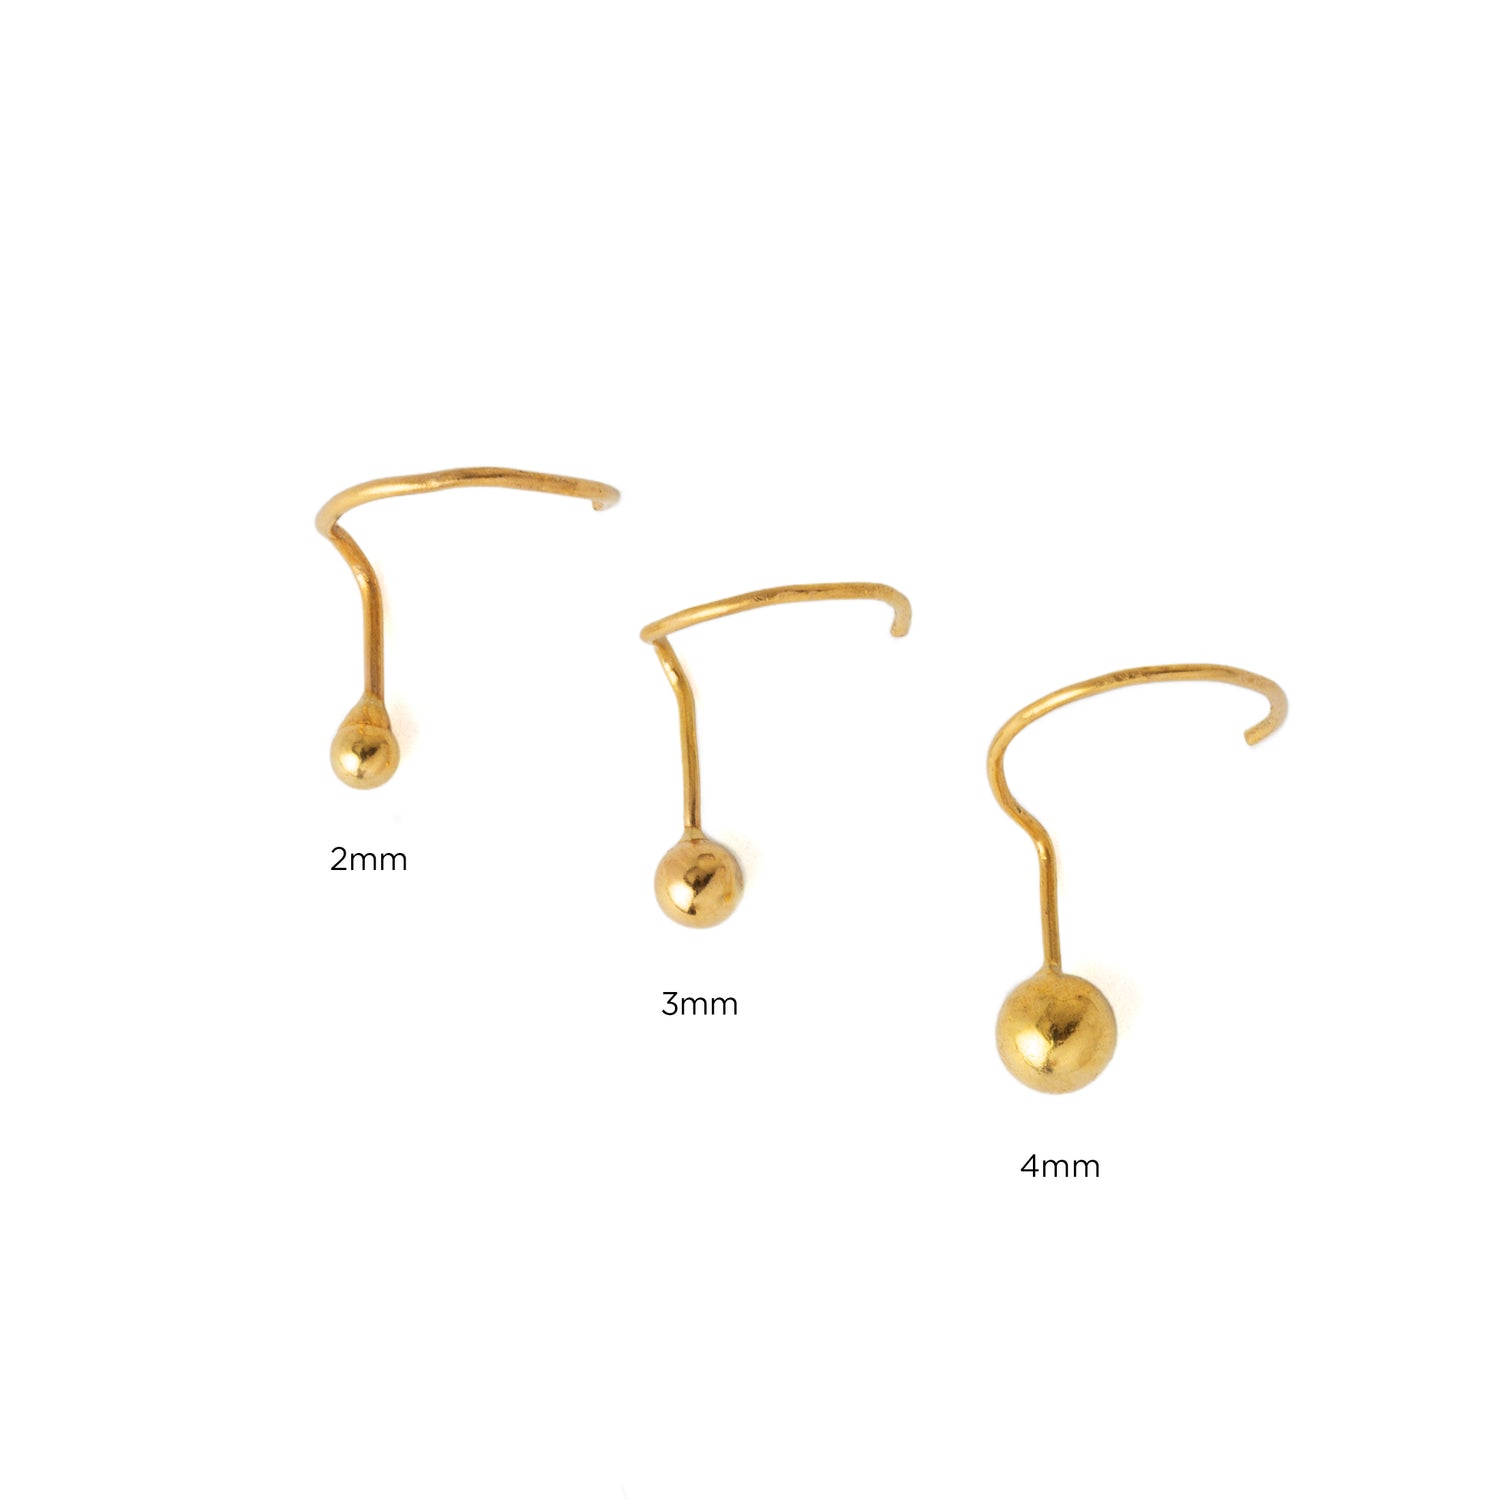 2mm, 3mm and 4mm 18K Gold Dot Nose Studs frontal view